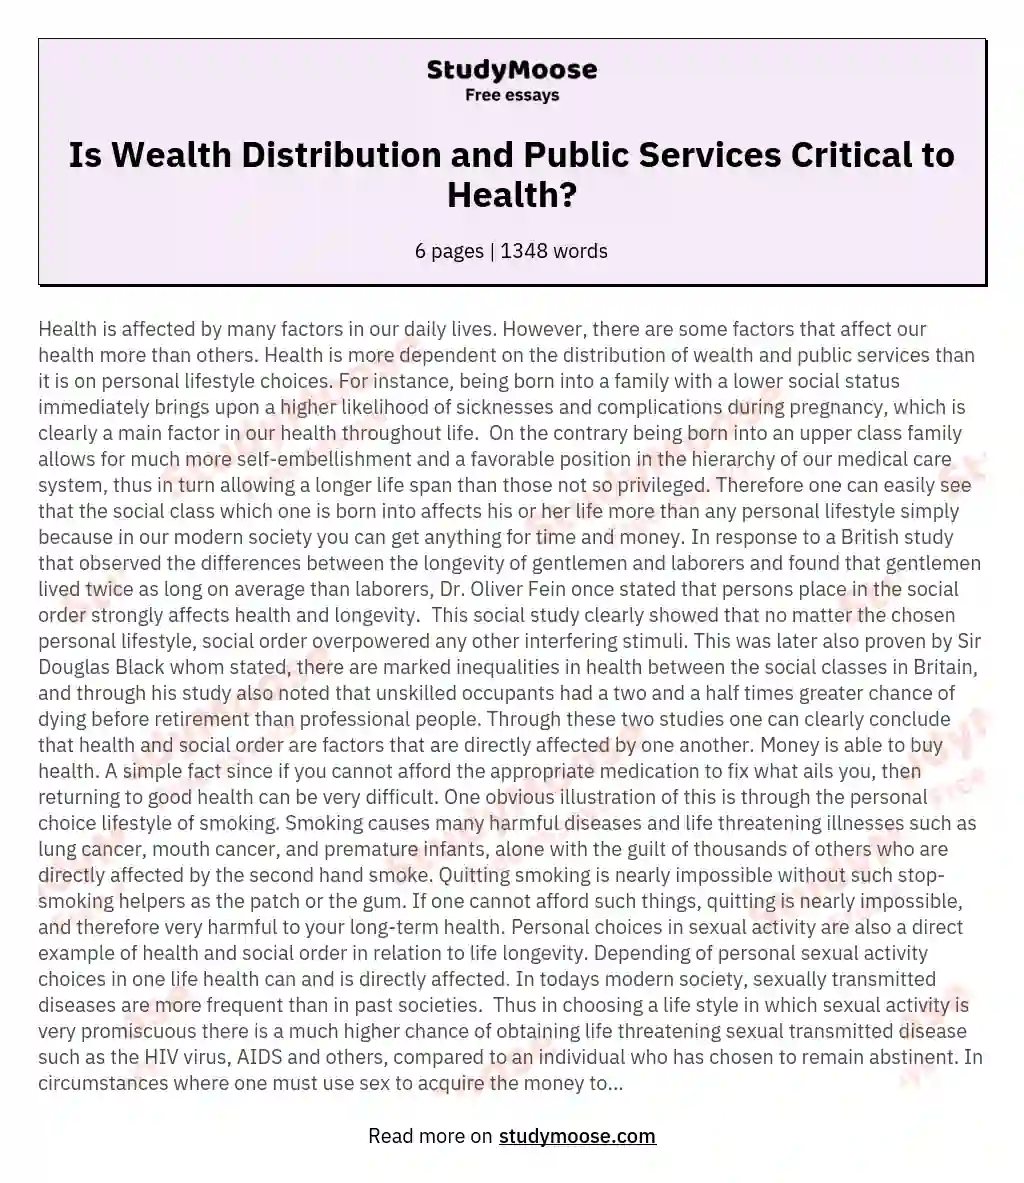 Is Wealth Distribution and Public Services Critical to Health? essay